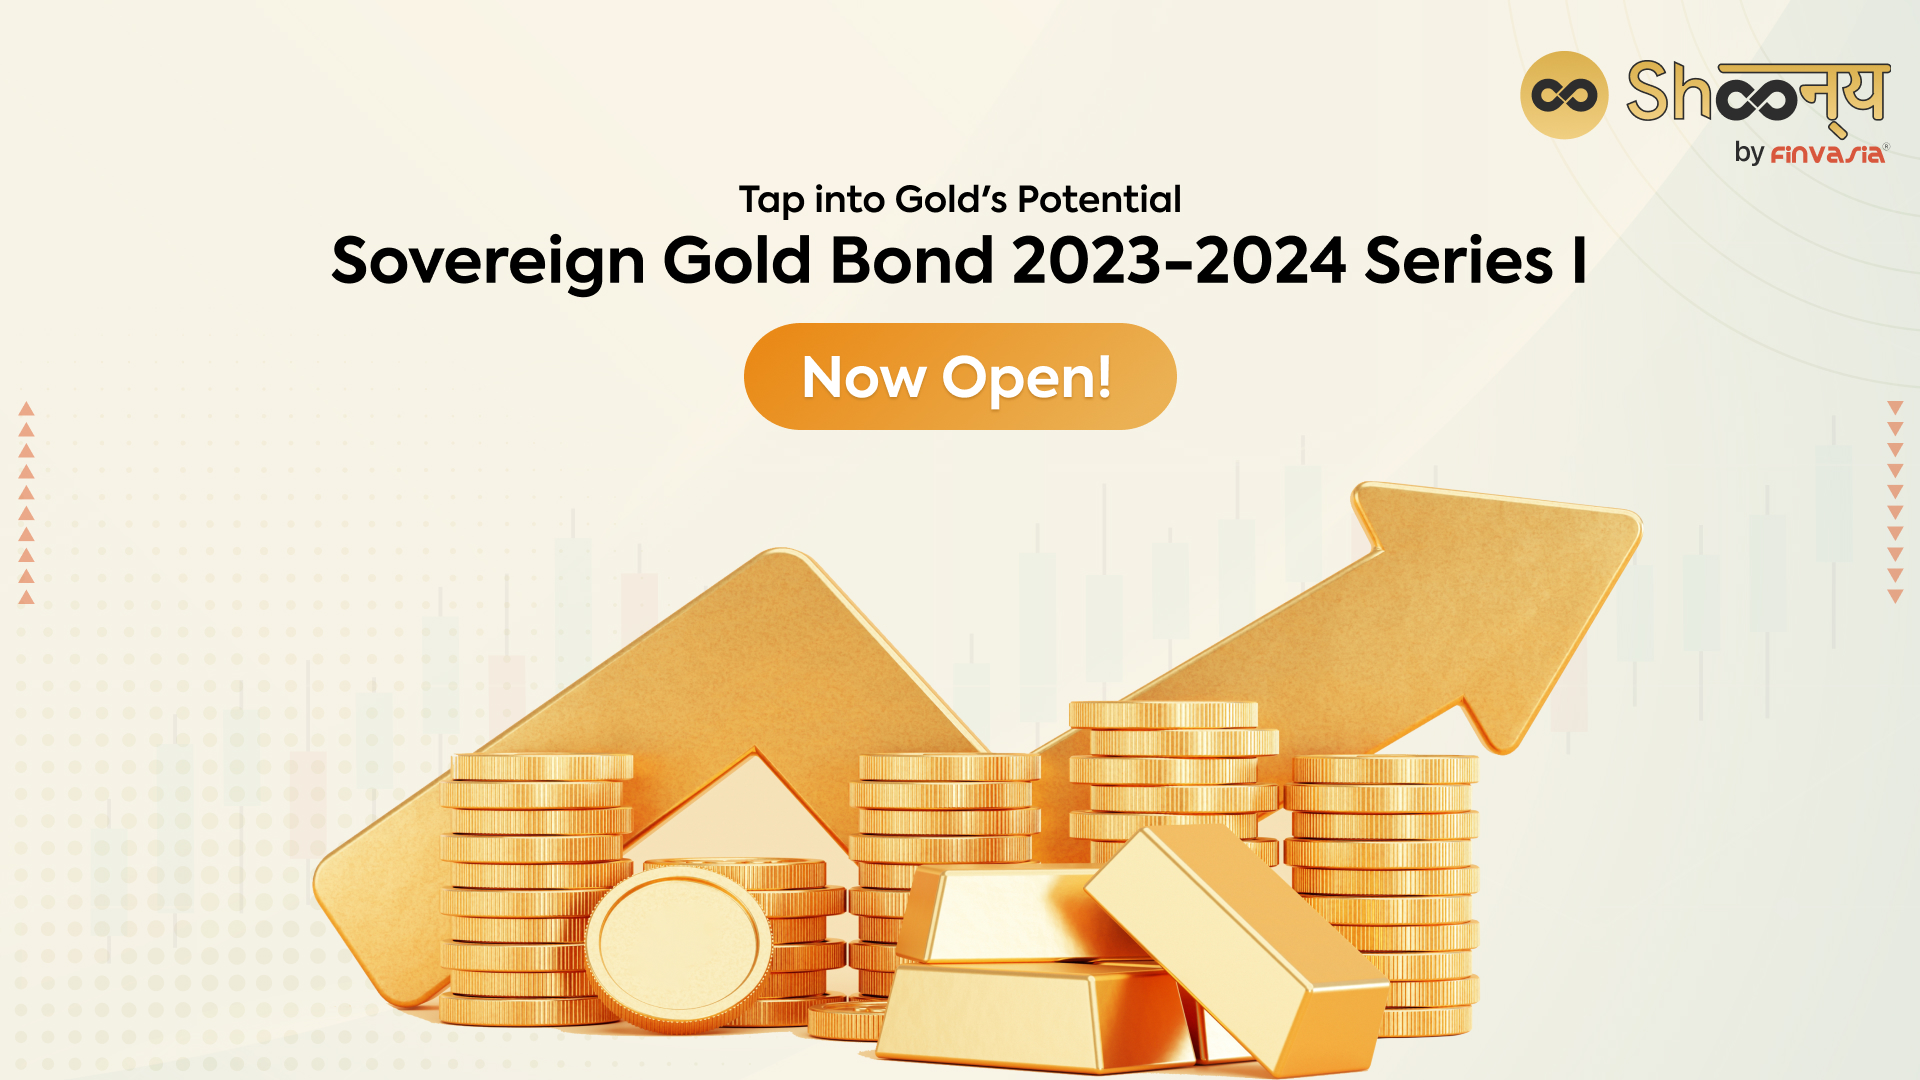 Sovereign Gold Bond 2023-2024 Series I: Opens Today